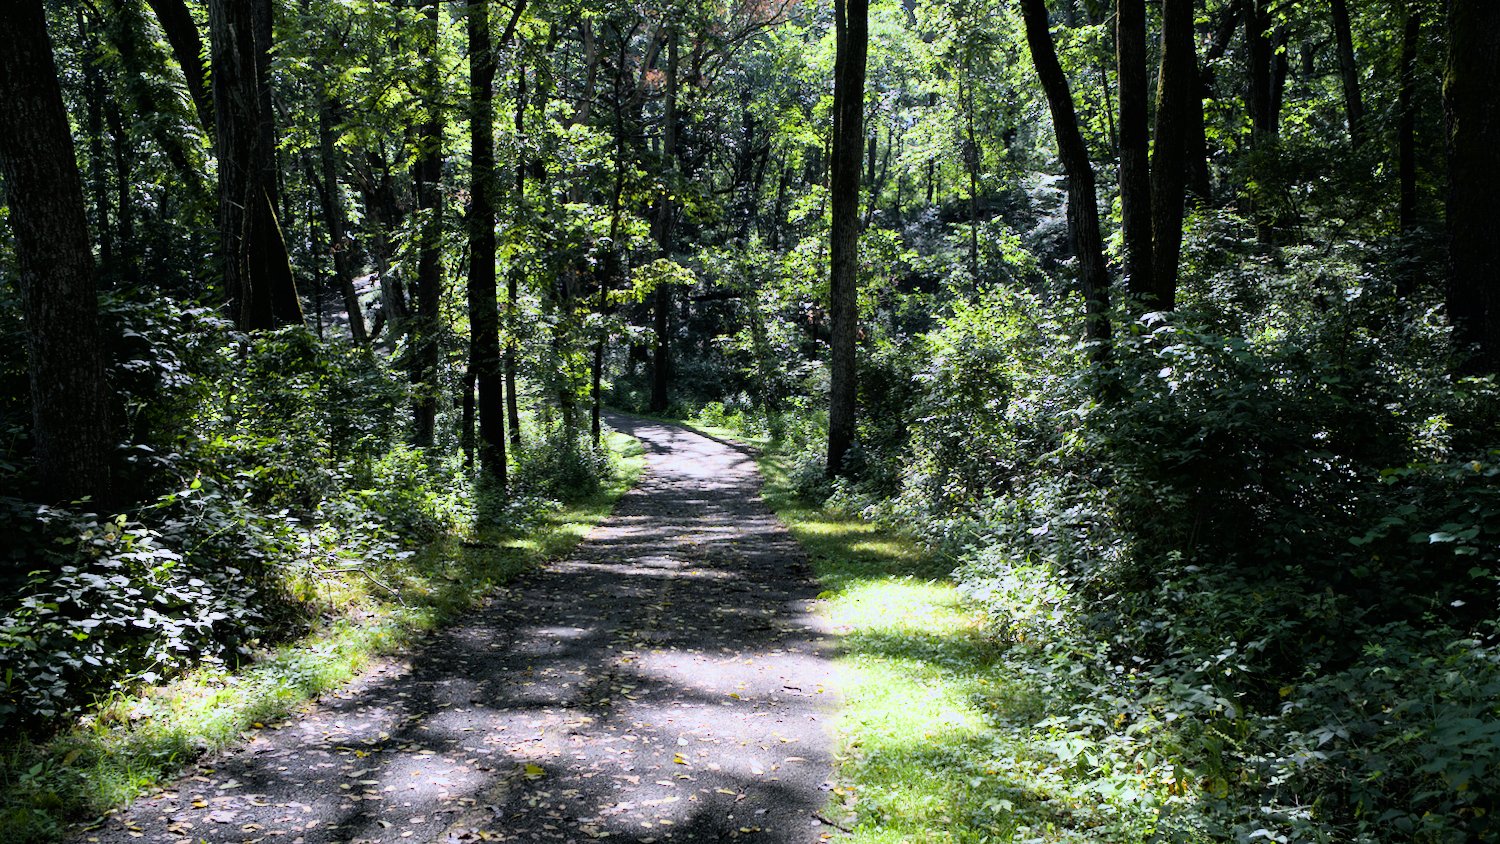 Part of the Prairie Trail, running through Sterne's Woods.